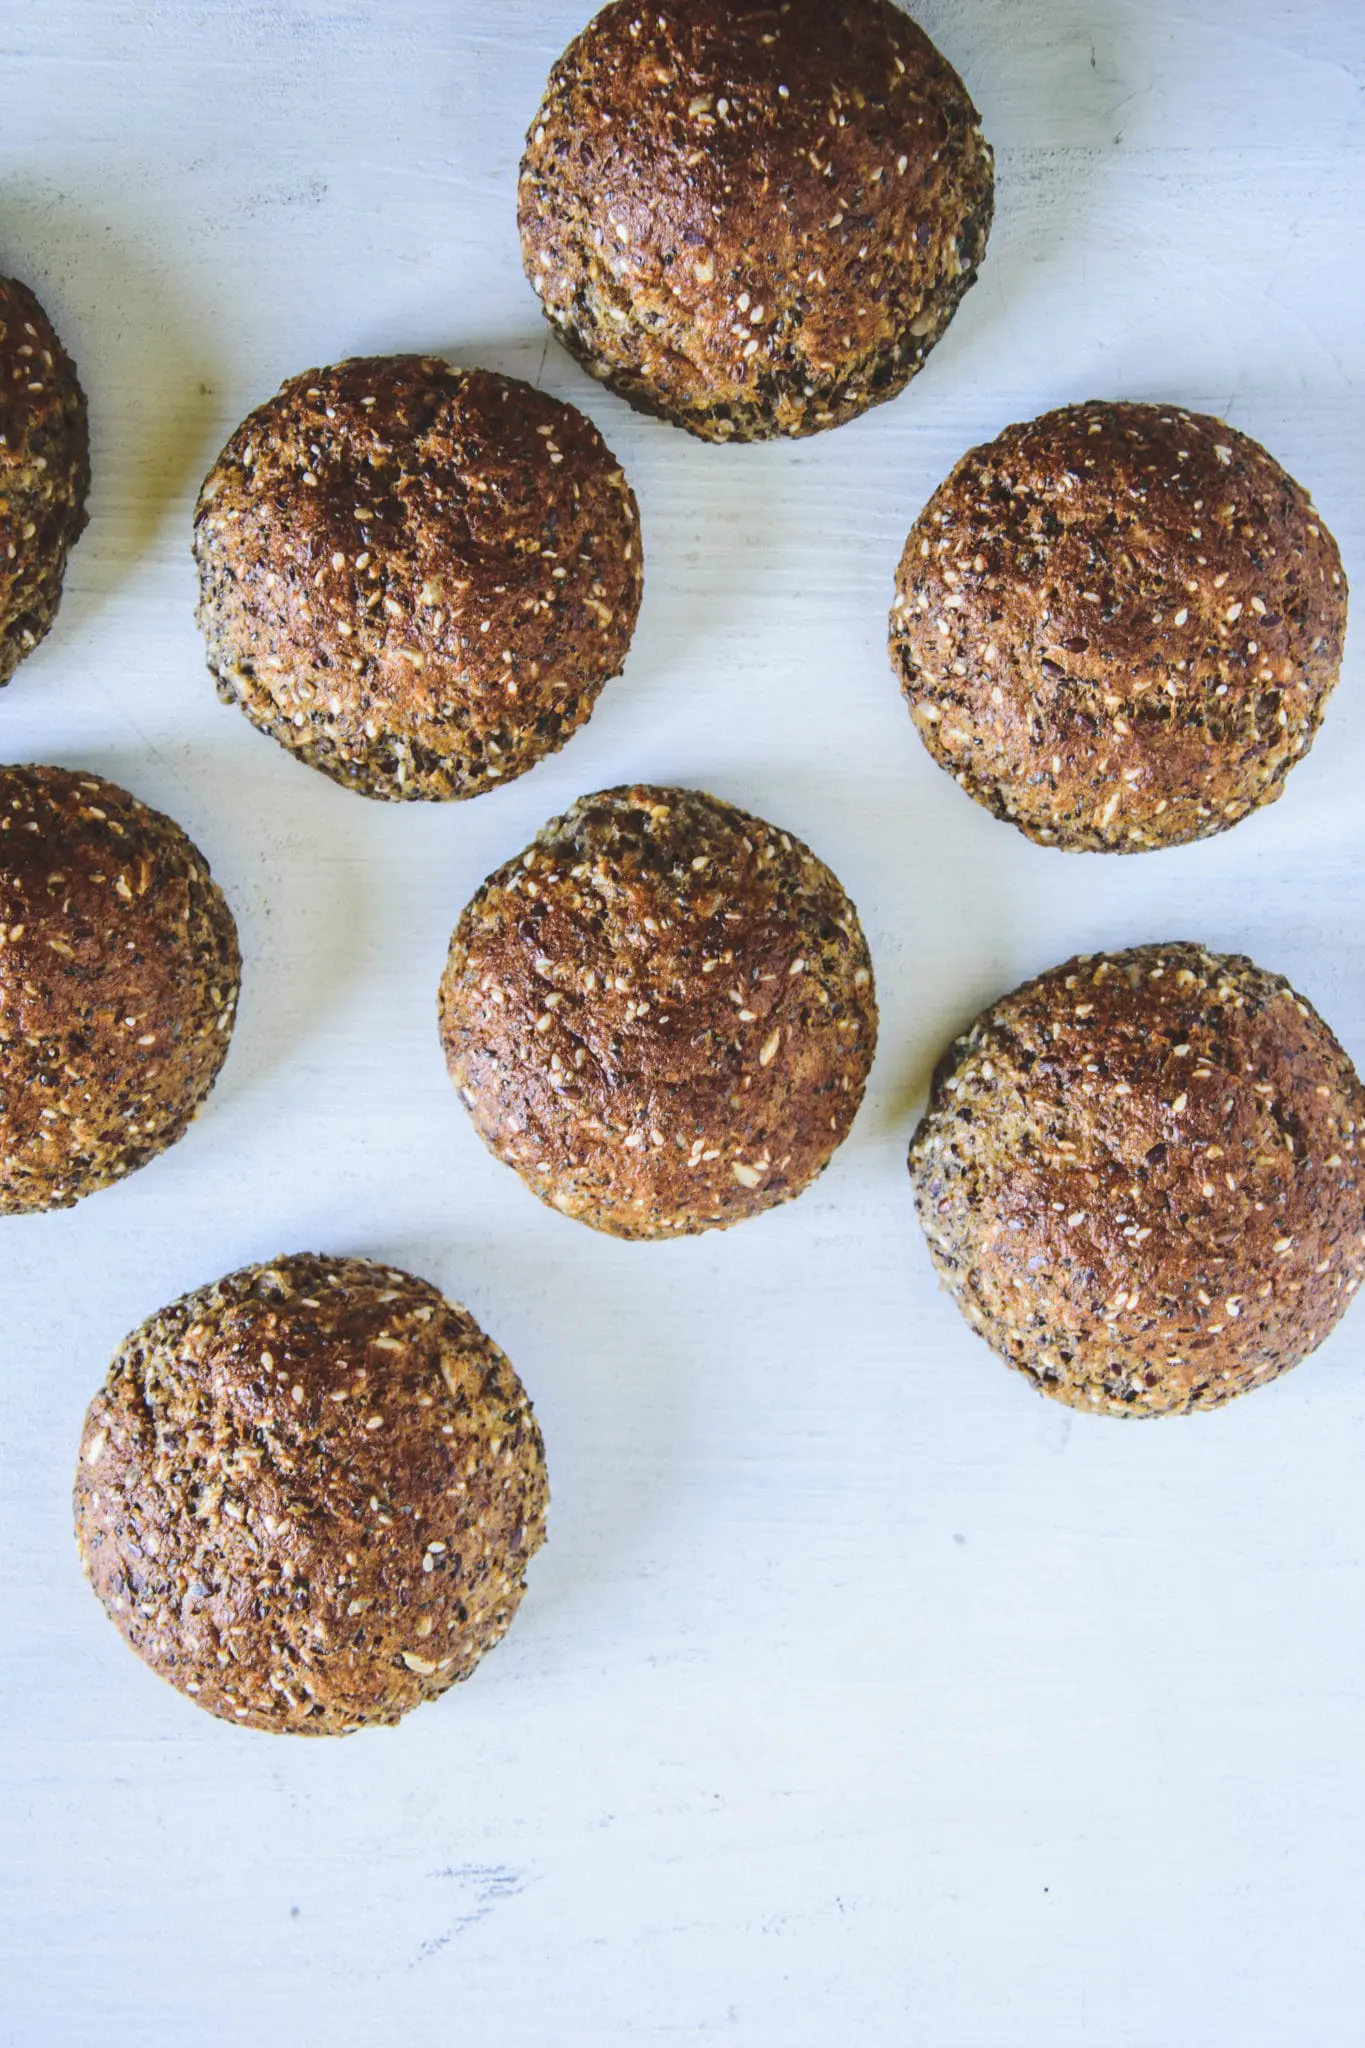 Schnelle Low Carb Saaten-Brötchen - Oats and Crumbs